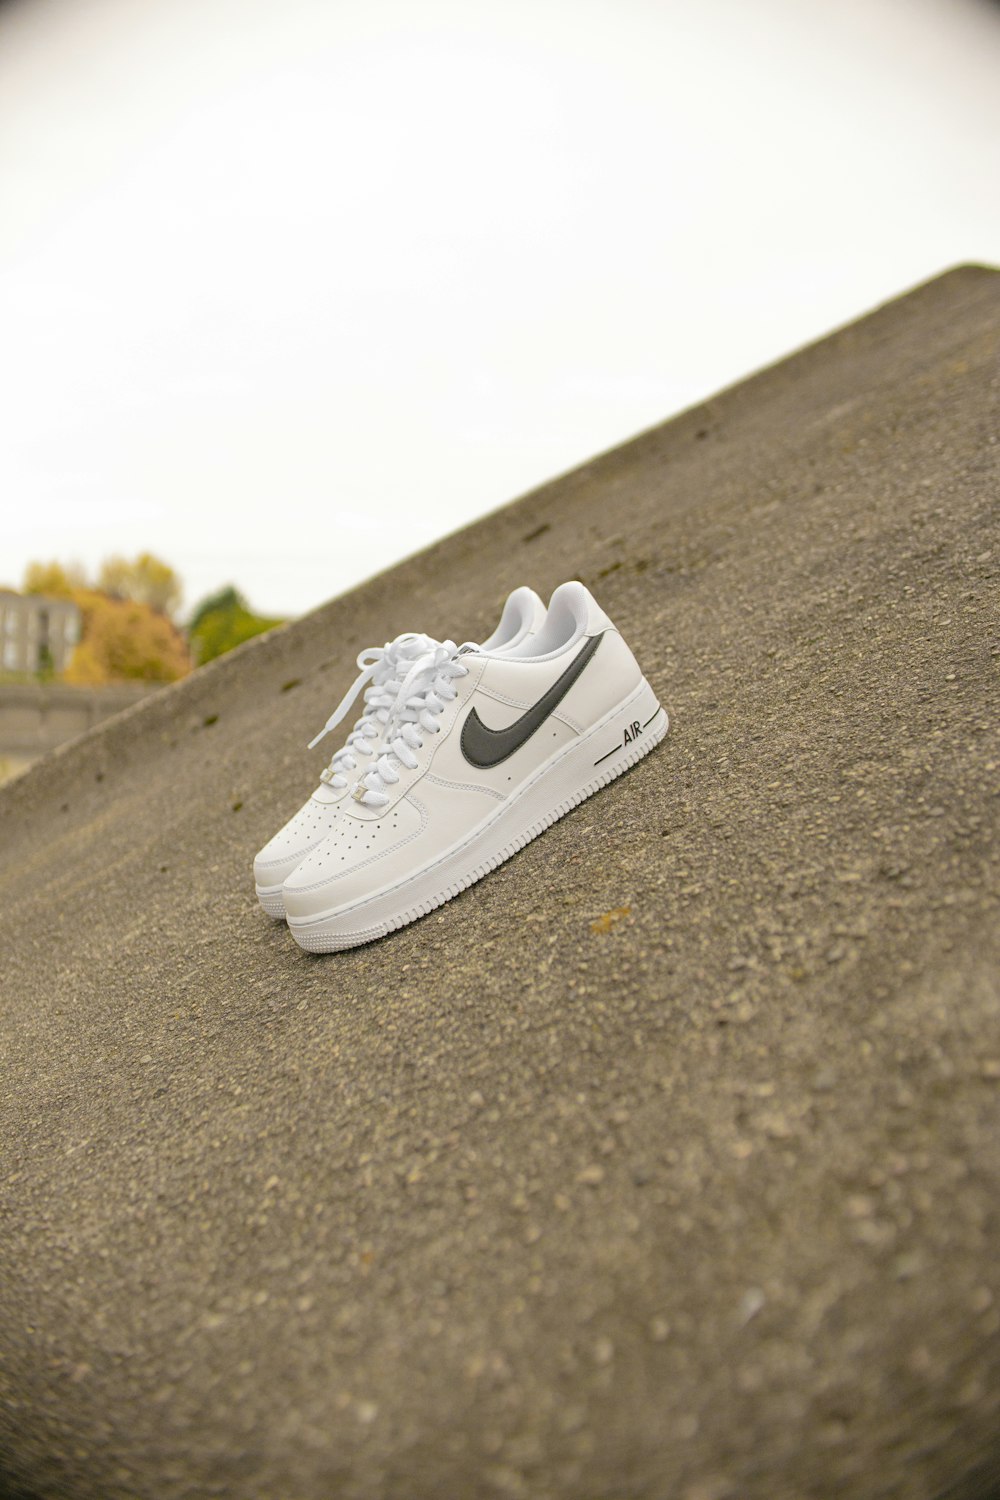 white nike air force 1 low on gray asphalt road during daytime